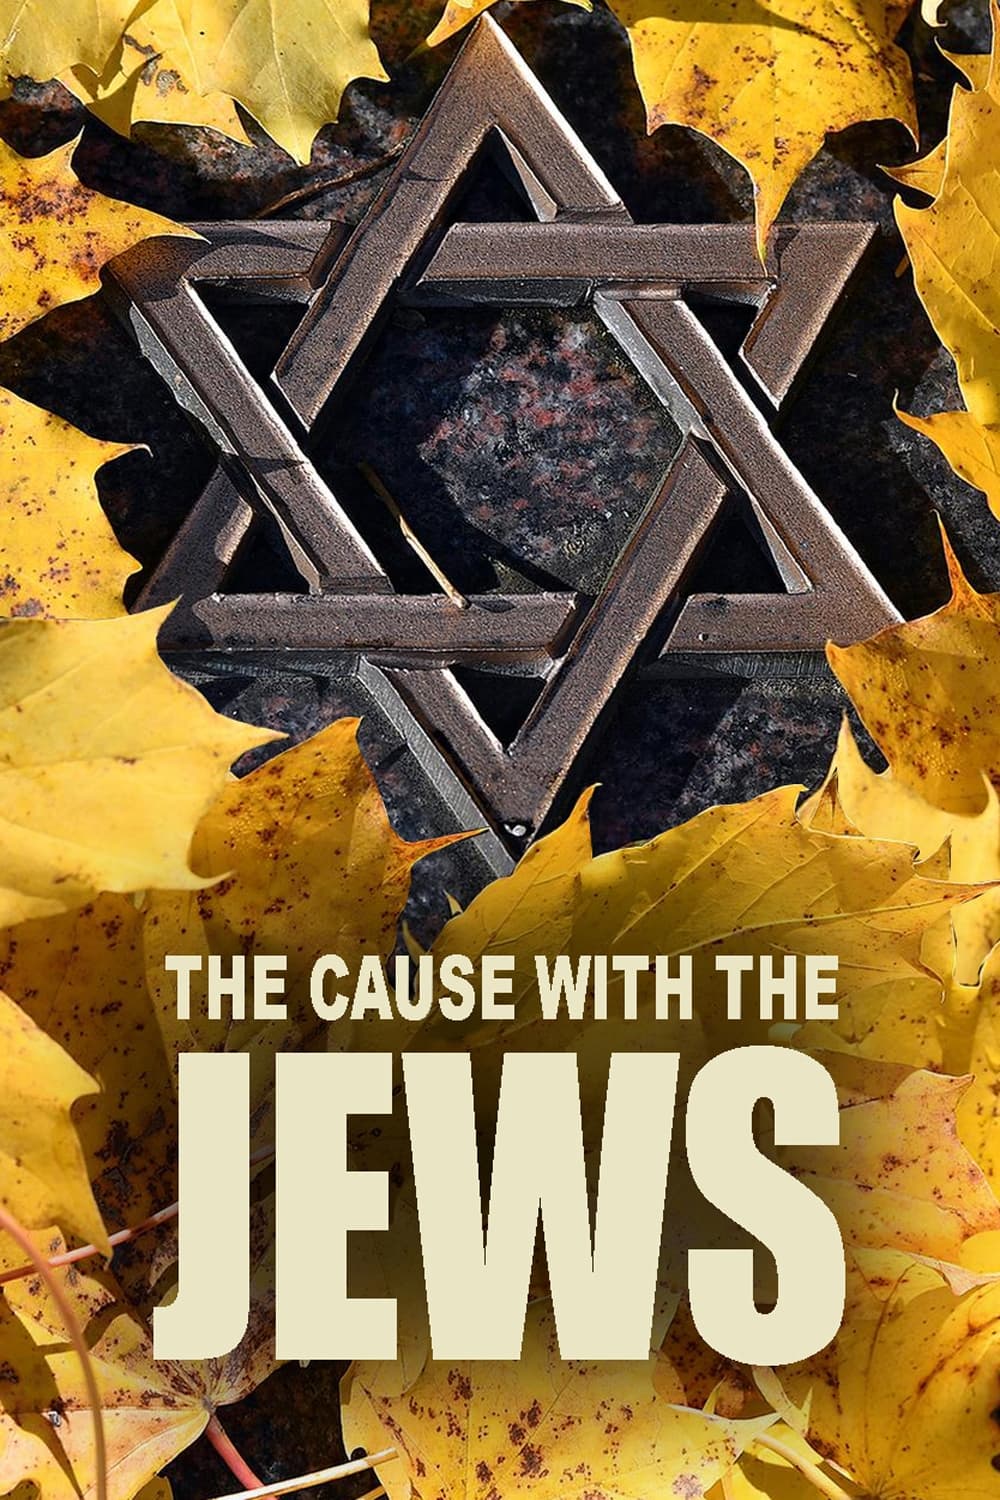 The Cause with the Jews